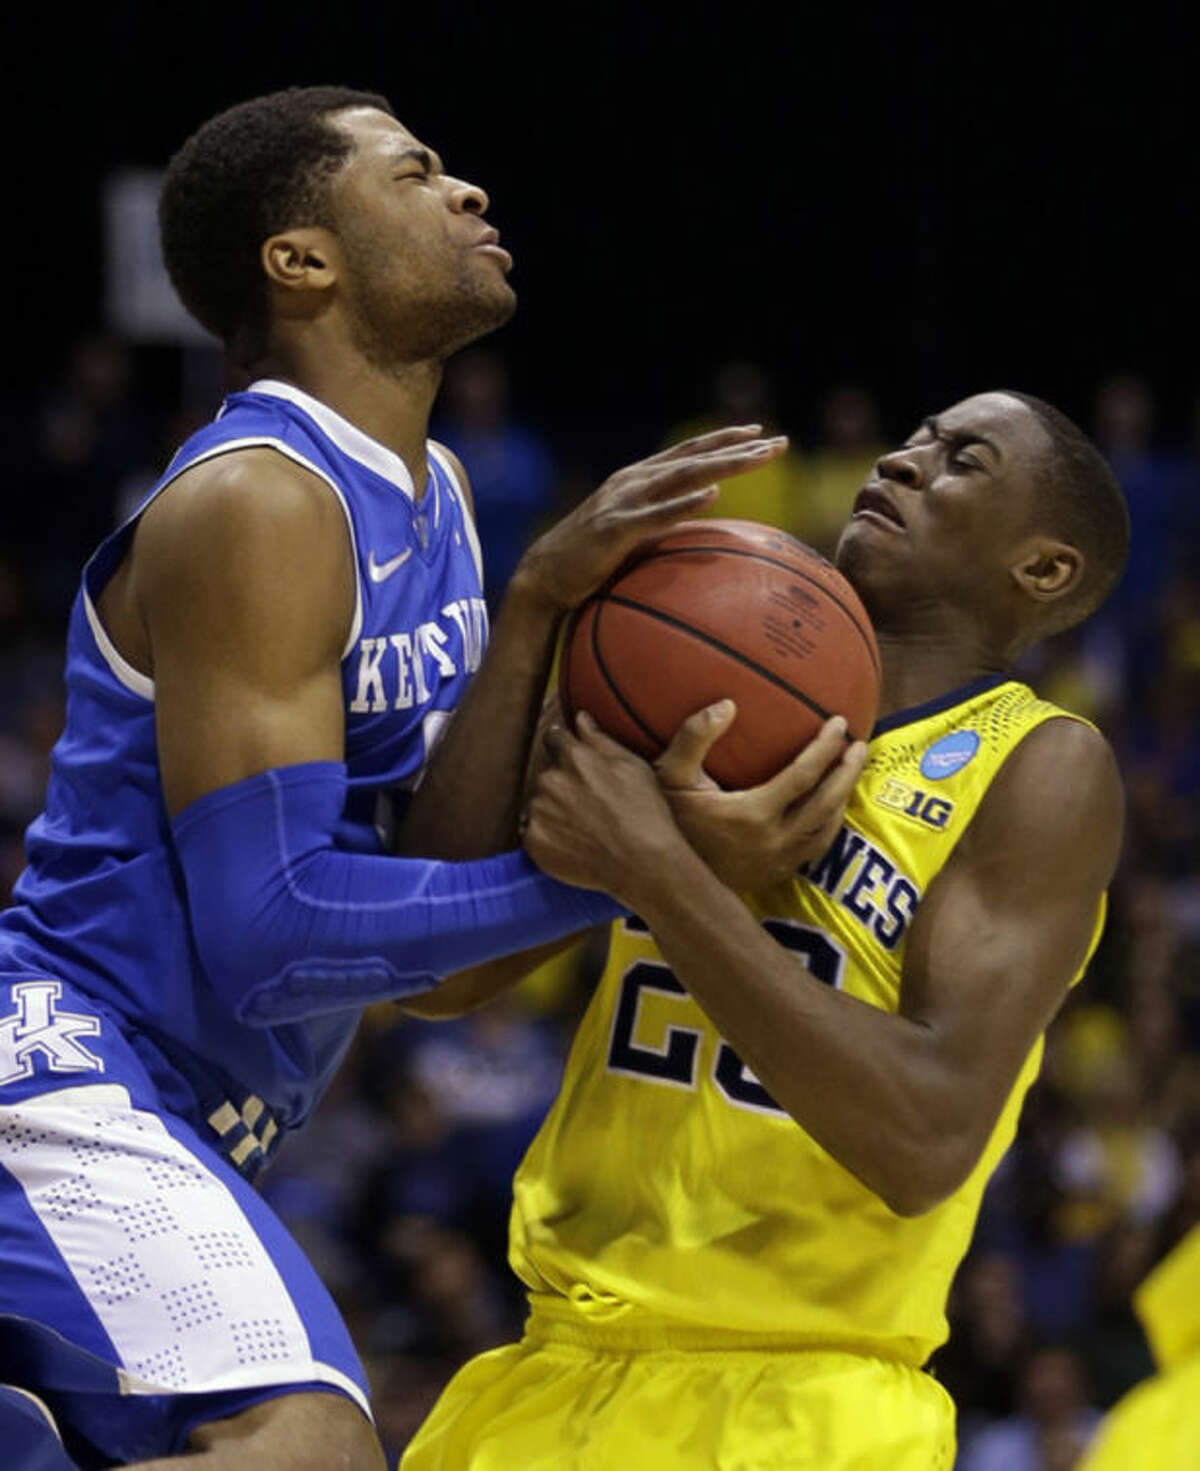 Kentucky's Andrew Harrison and Michigan's Caris LeVert go after a loose ball during the second half of an NCAA Midwest Regional final college basketball tournament game Sunday, March 30, 2014, in Indianapolis. (AP Photo/David J. Phillip)